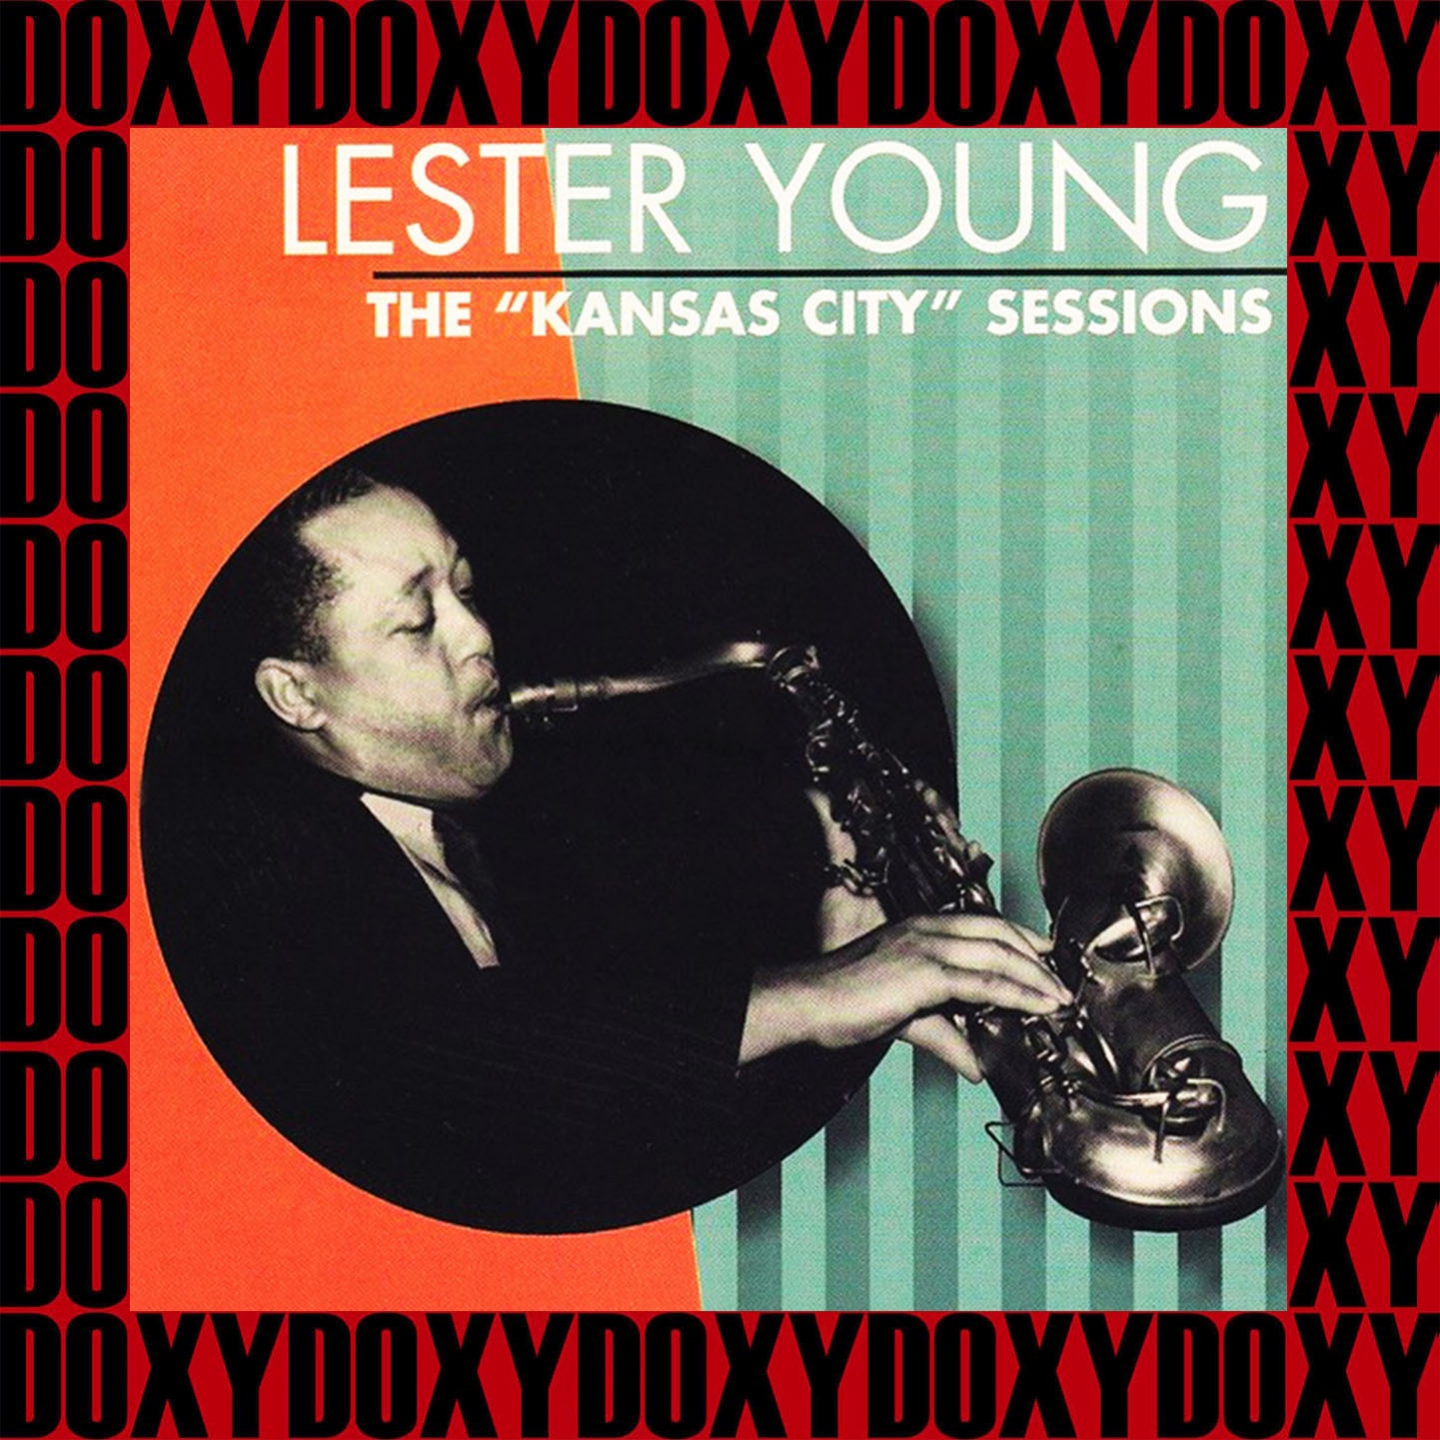 Kansas City Sessions, 1938-44 (Remastered Version) (Doxy Collection)